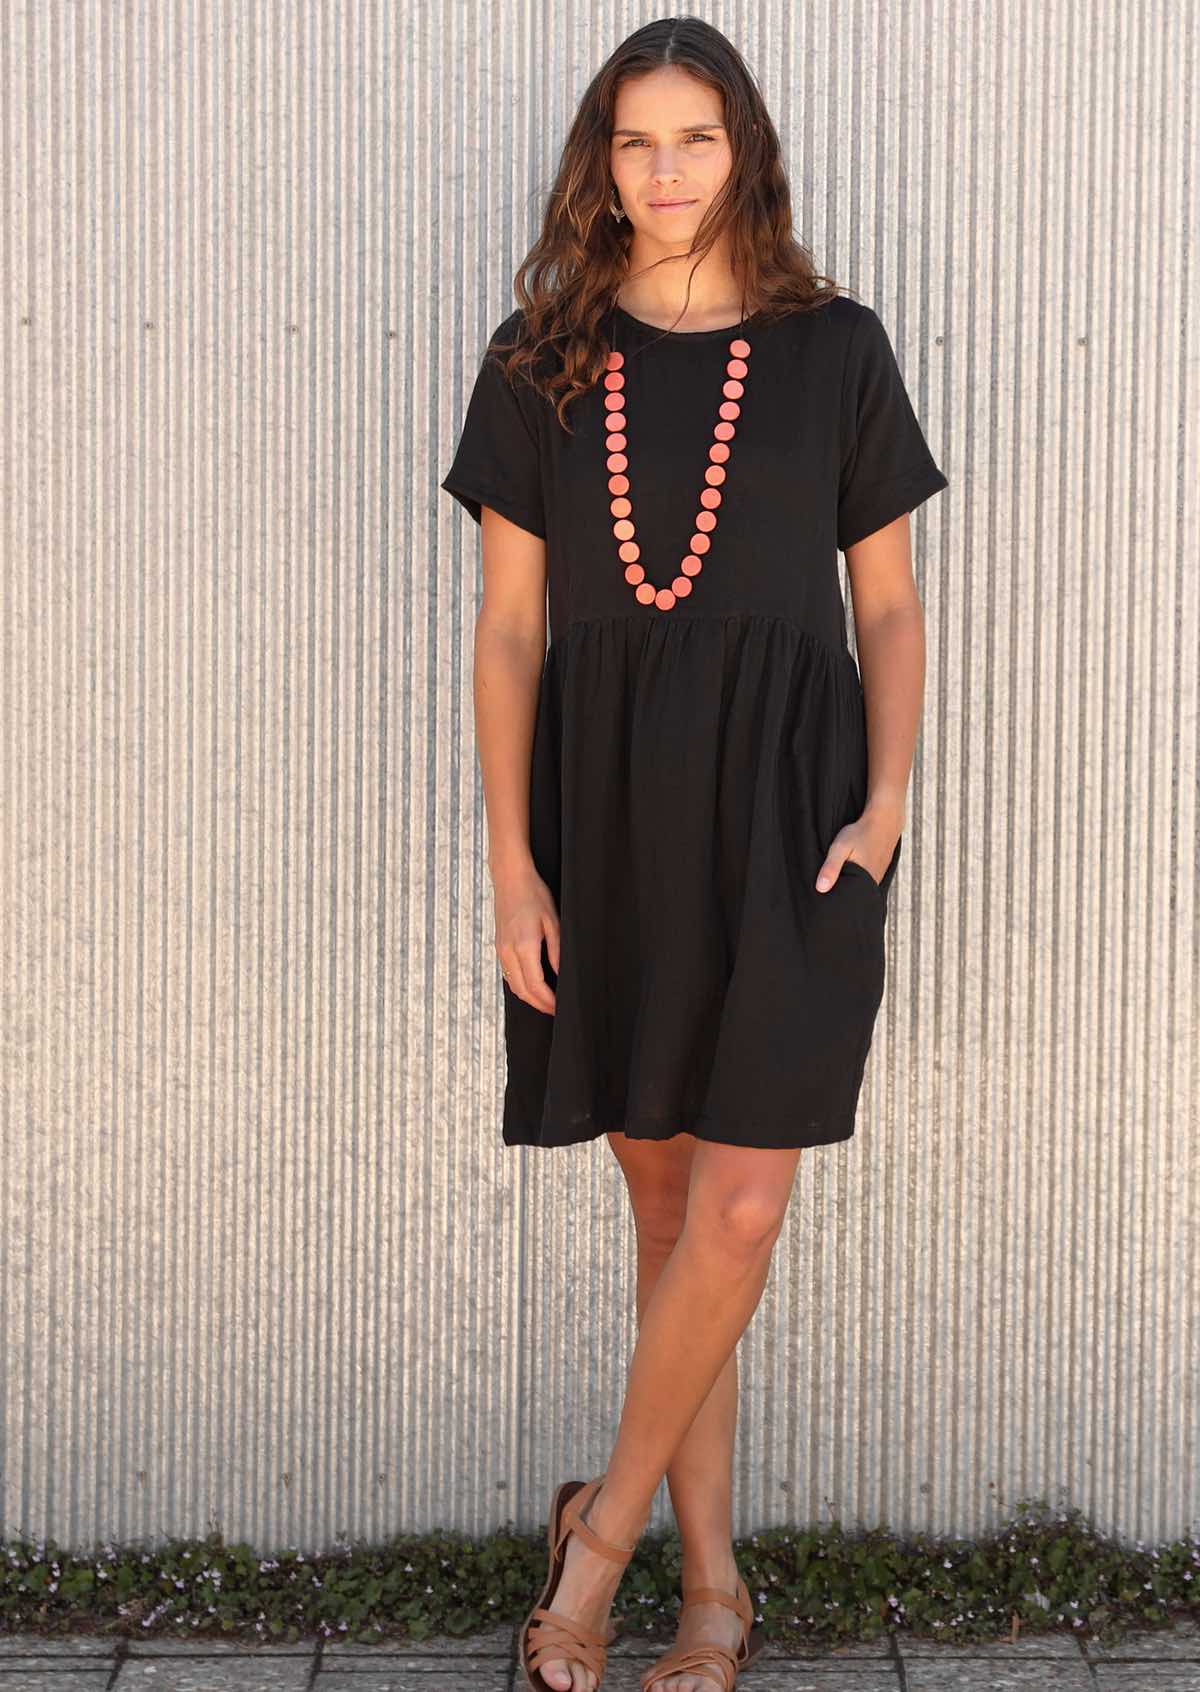 Woman in knee length black dress with orange necklace and one hand in pocket 